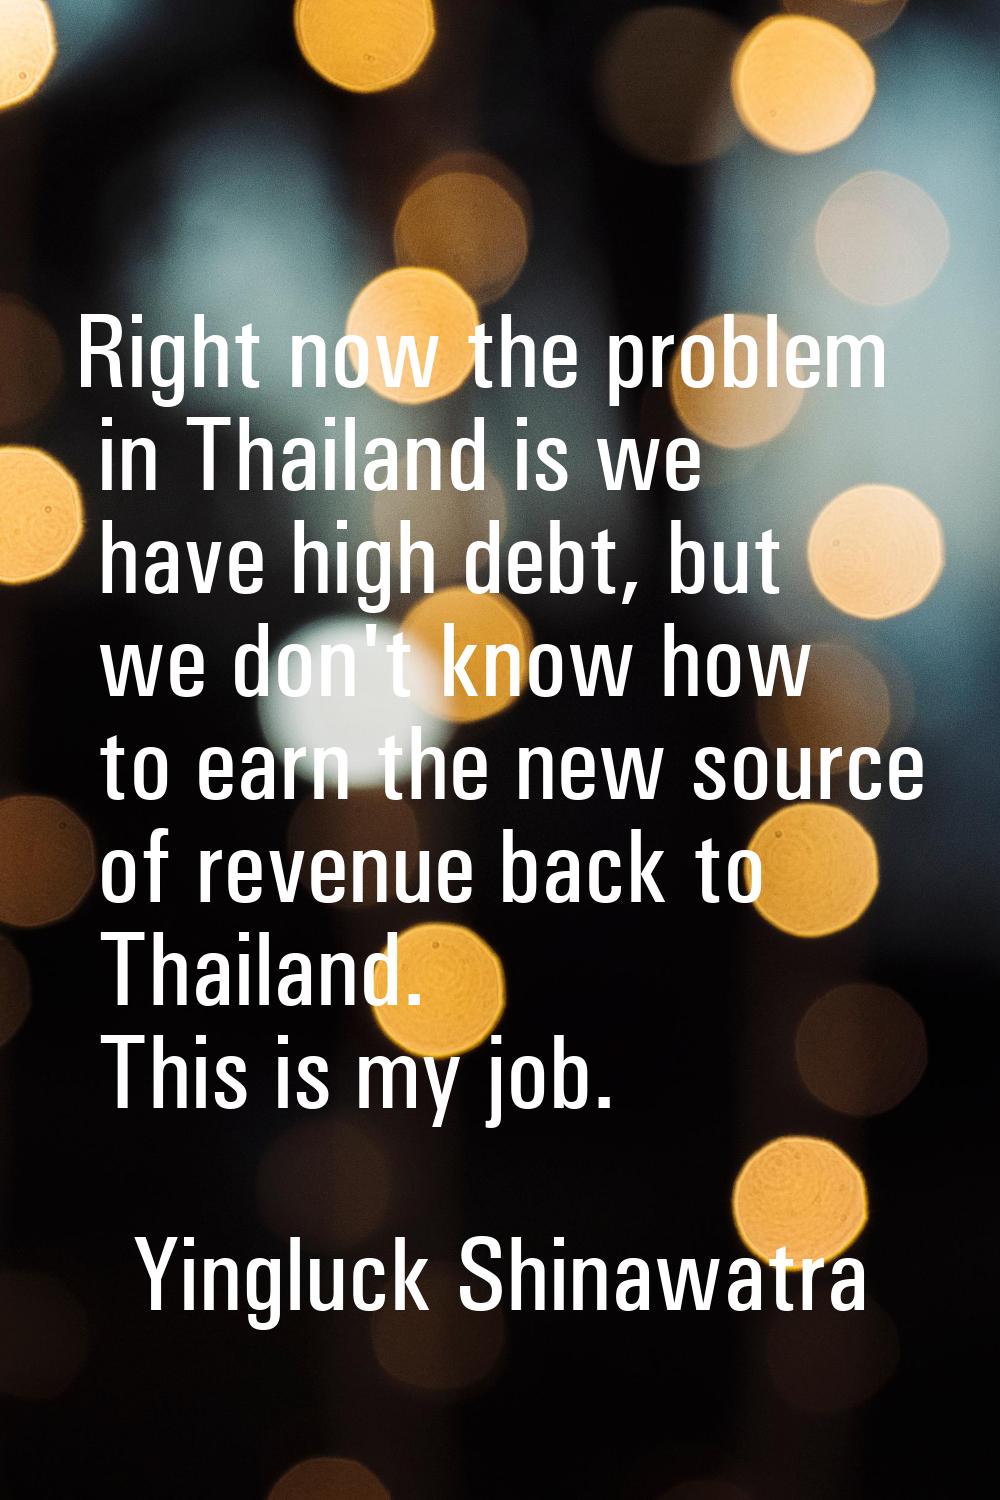 Right now the problem in Thailand is we have high debt, but we don't know how to earn the new sourc